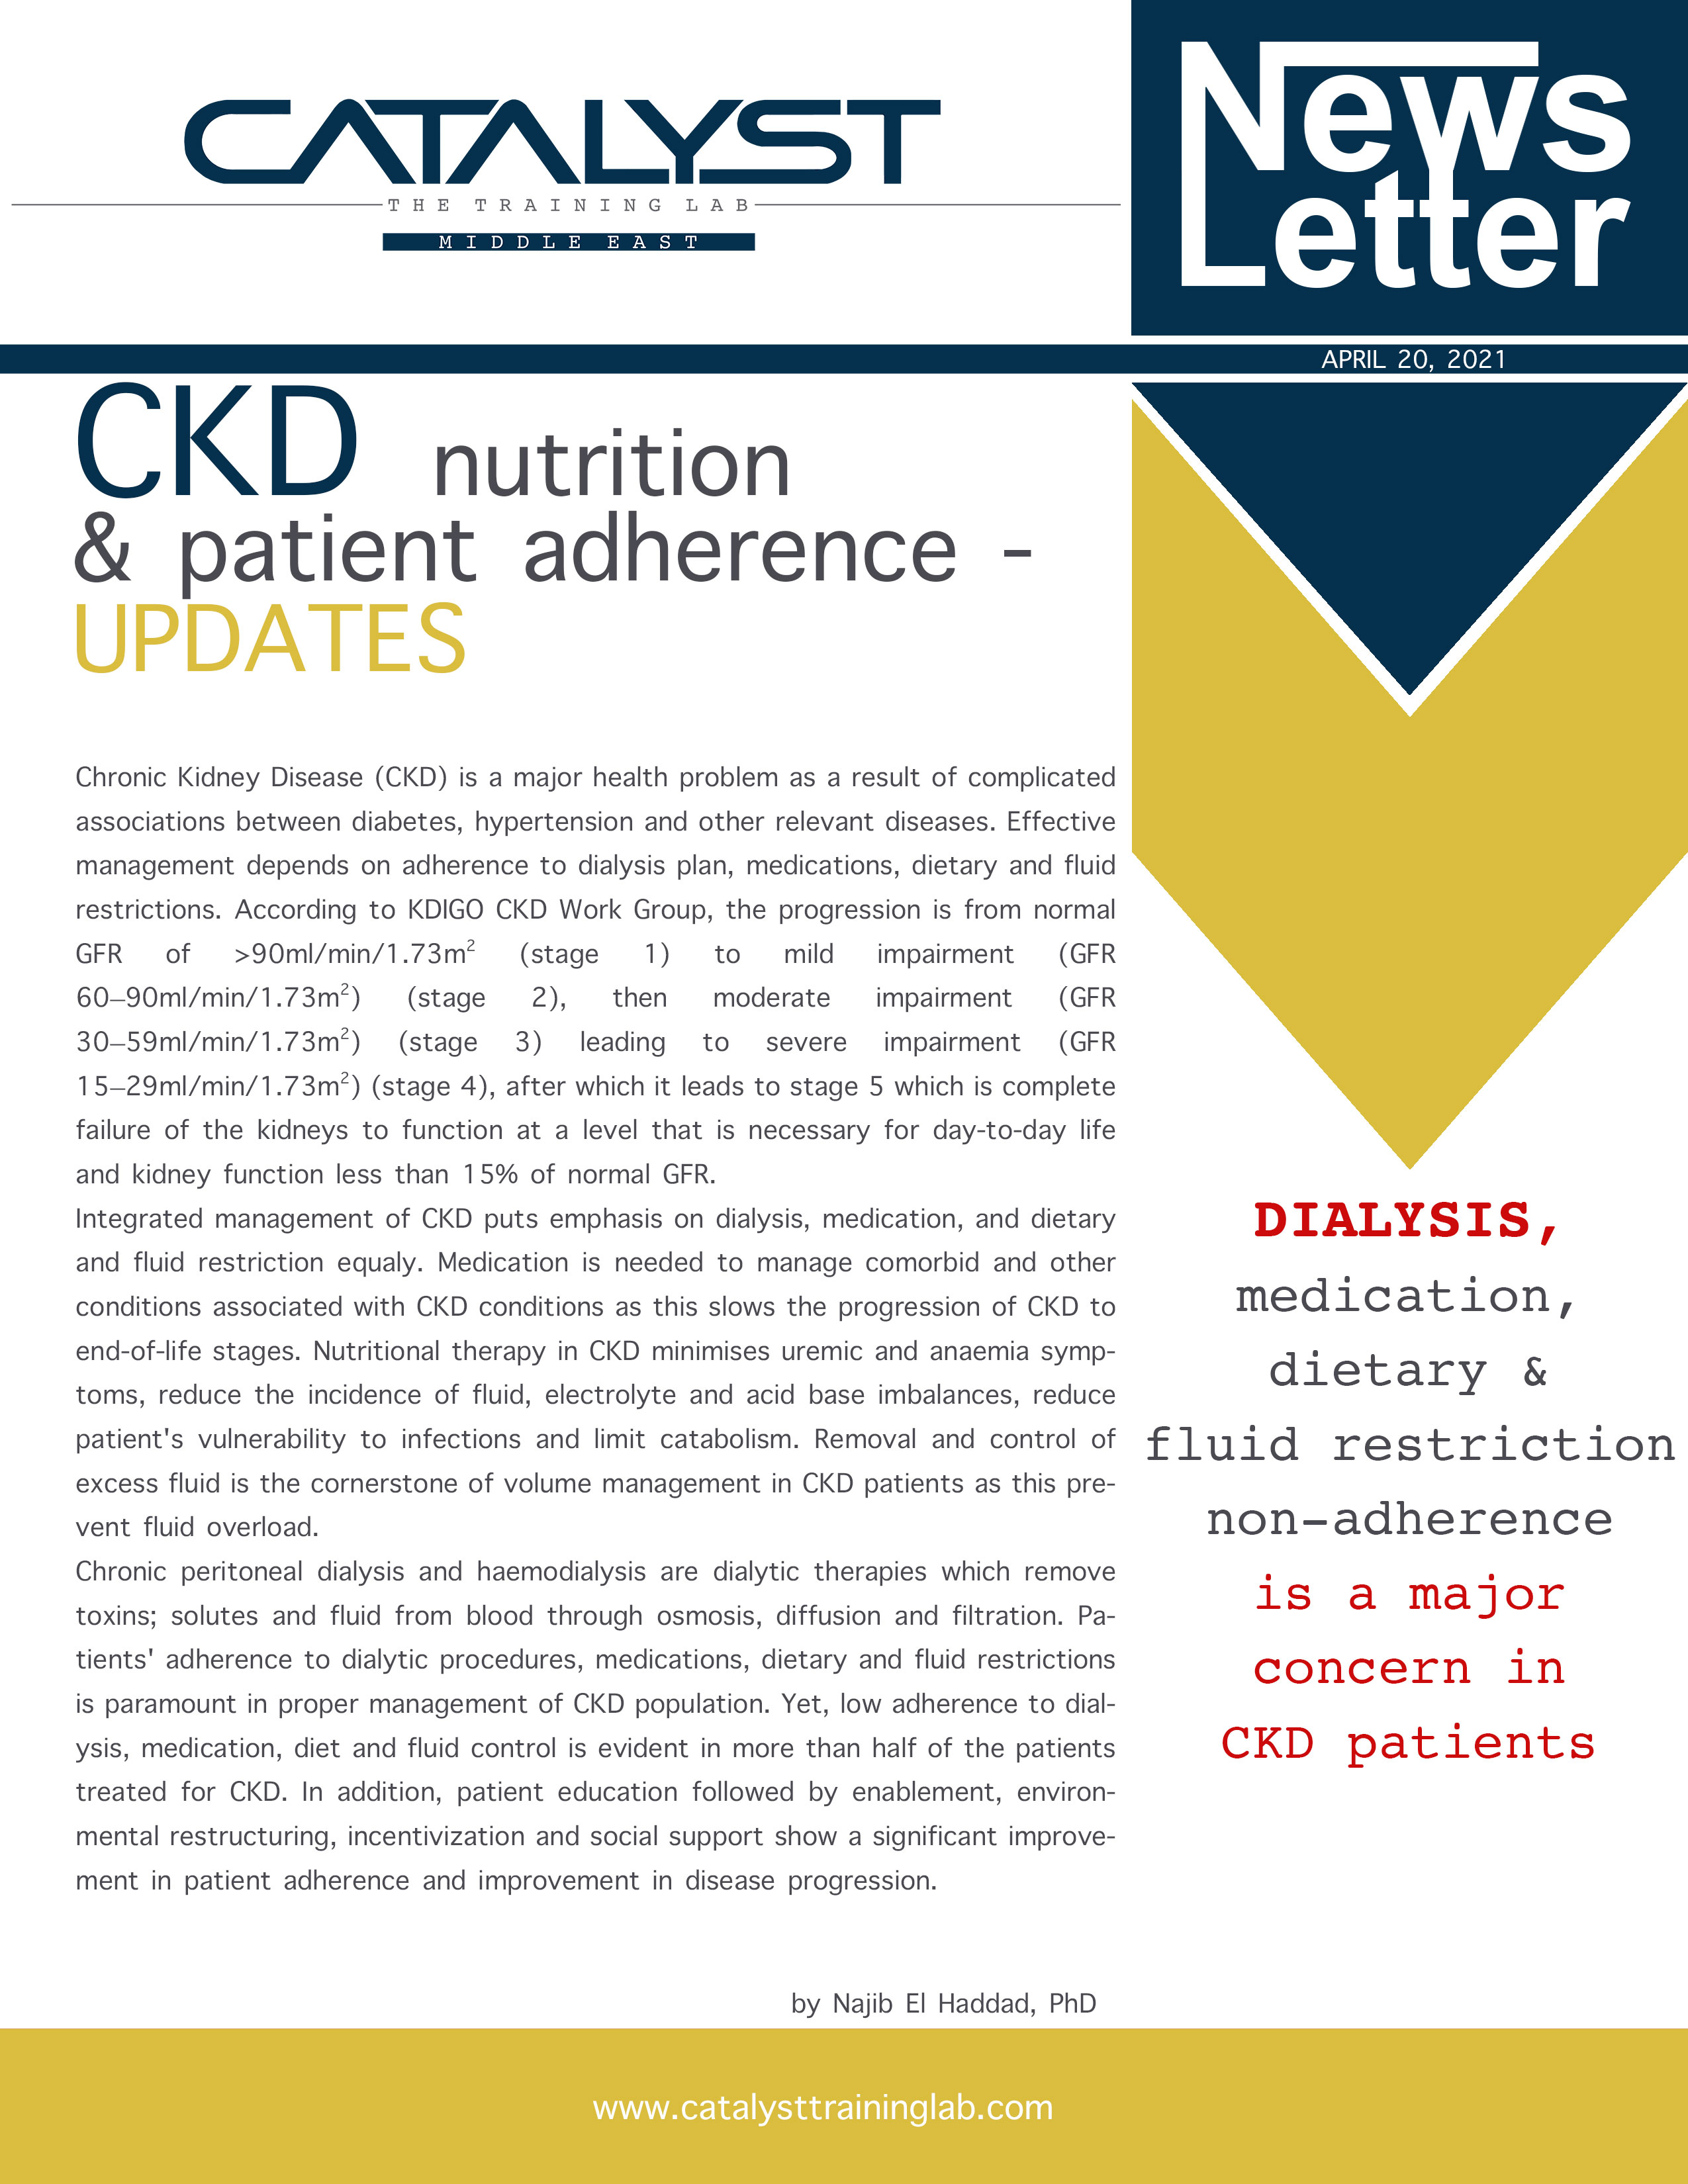 CKD nutrition patient adherence 